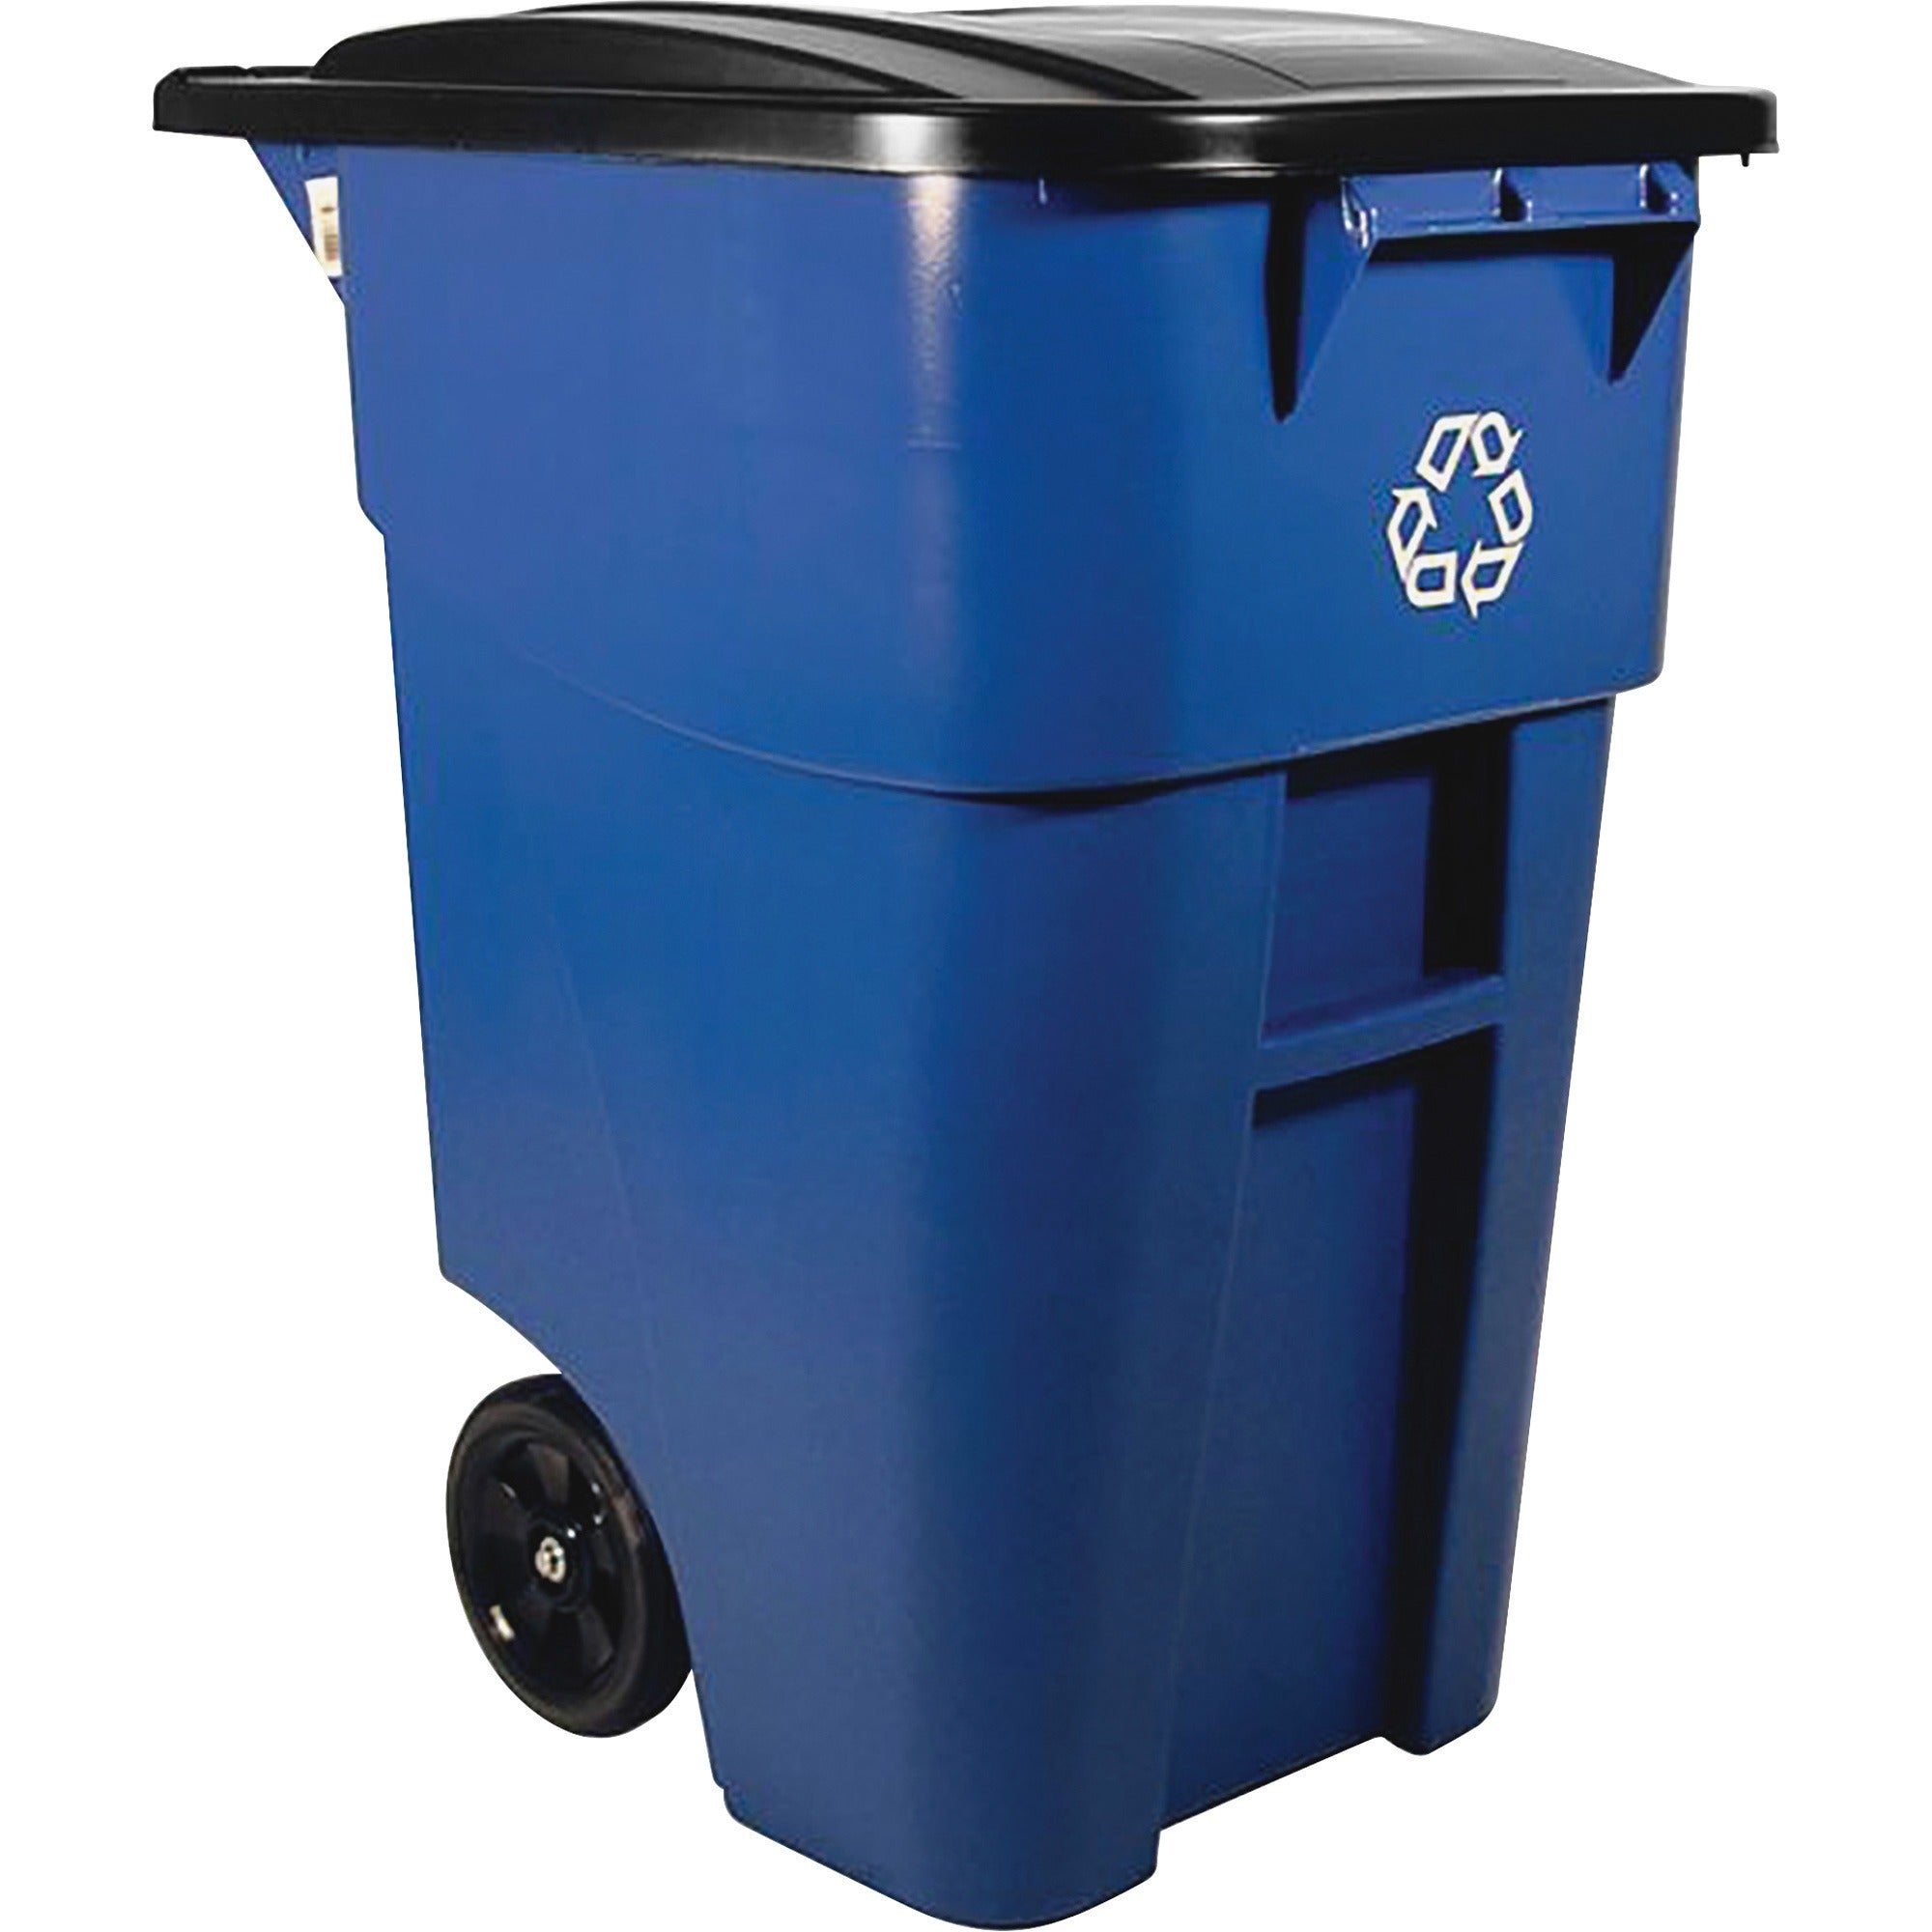 rubbermaid-commercial-brute-recycling-rollout-container-swing-lid-50-gal-capacity-rectangular-mobility-heavy-duty-wheels-lid-locked-hinged-durable-easy-to-clean-365-height-x-234-width-resin-blue-2-carton_rcp9w2773bect - 1